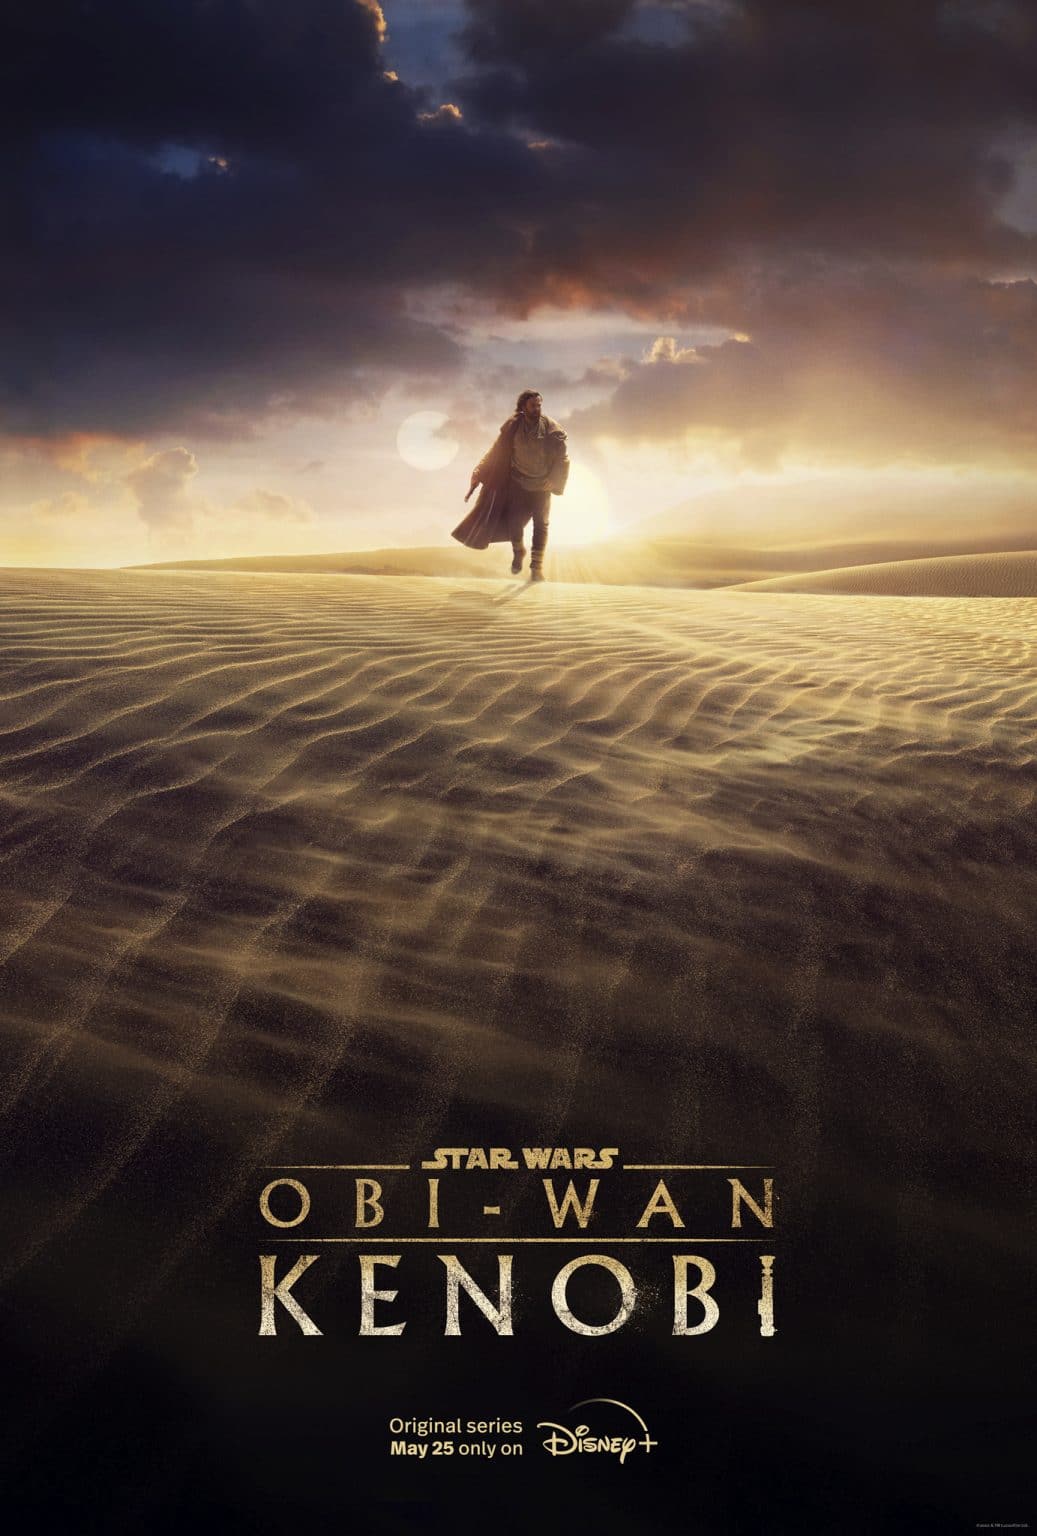 Disney Obi Wan Kenobi Series Release Date And New Poster Have Been Revealed That Hashtag Show